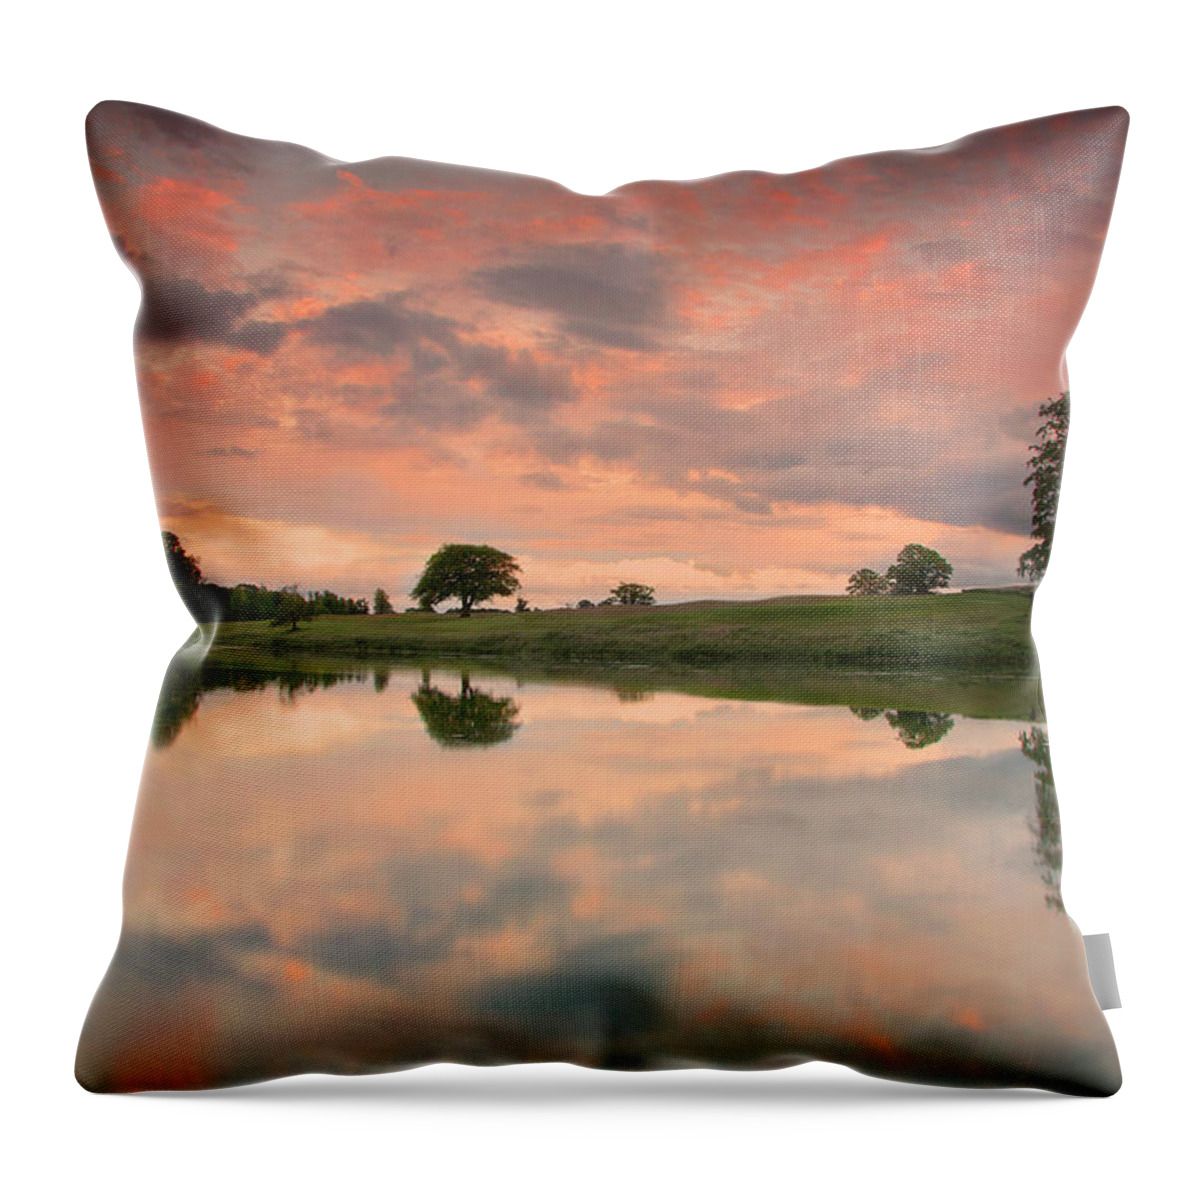 Scenics Throw Pillow featuring the photograph Carton Lake Sunset by Ashley Lowry